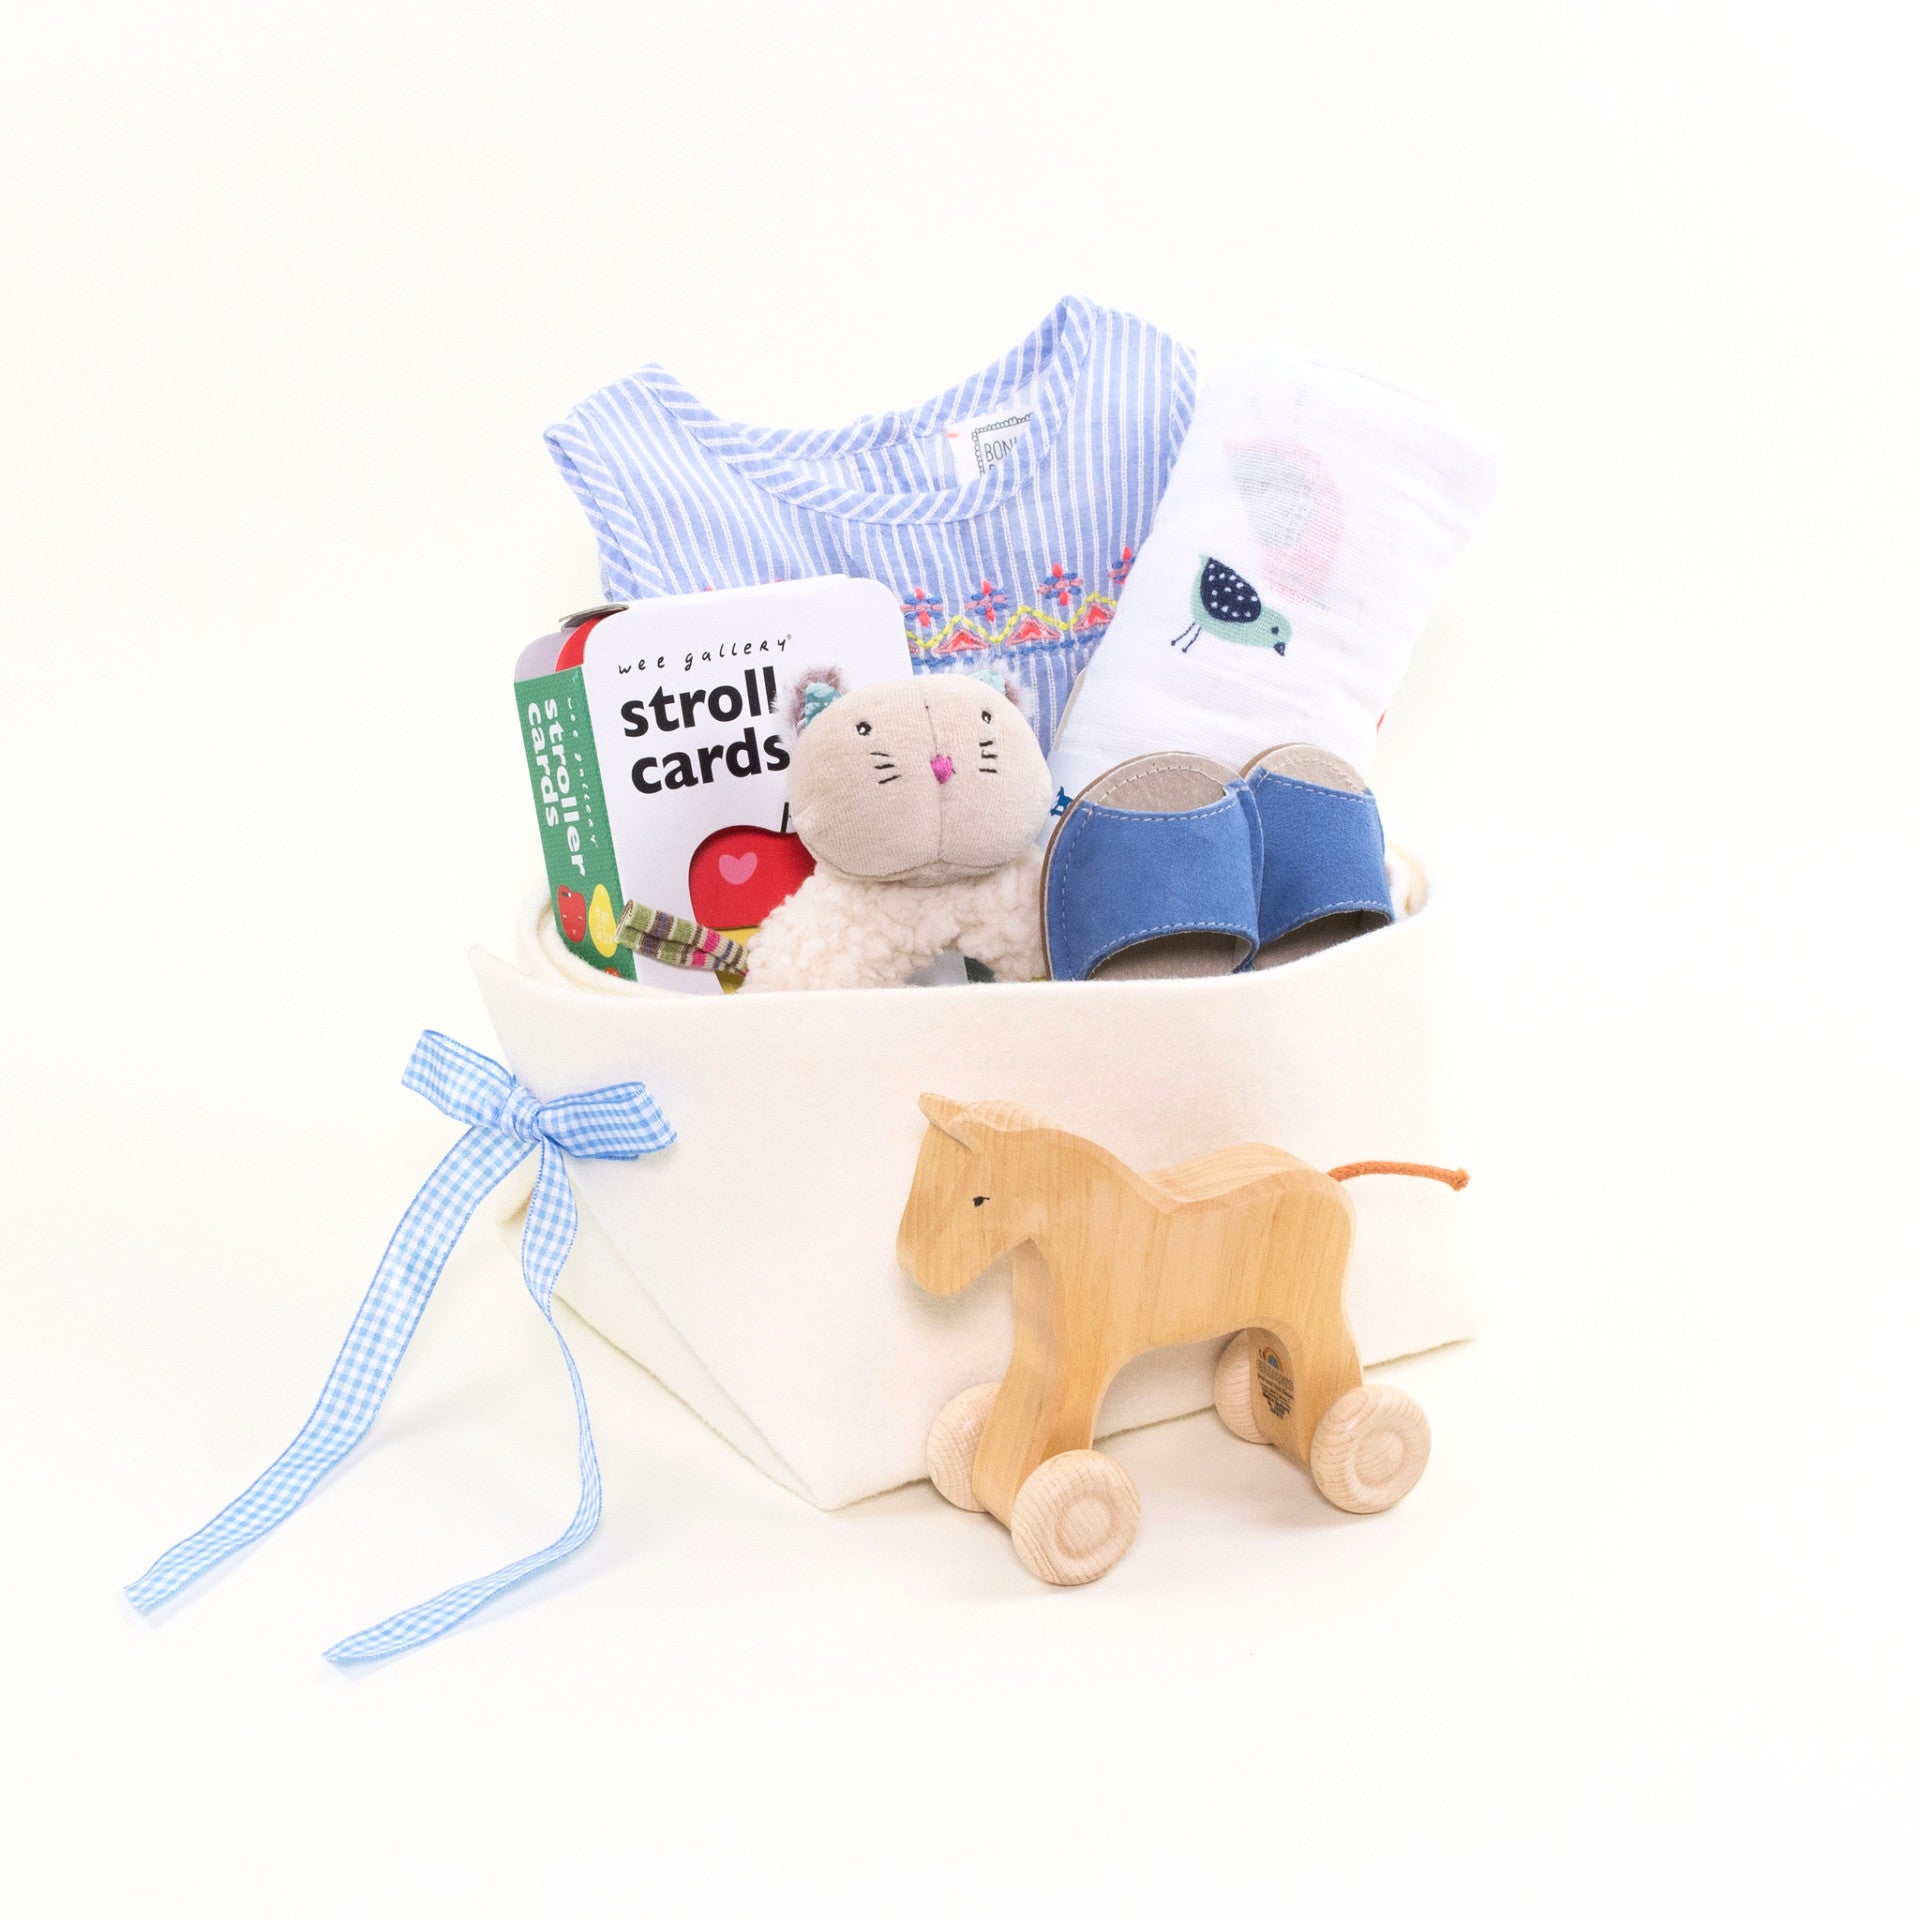 Luxury Baby Gift Basket at Bonjour Baby Baskets